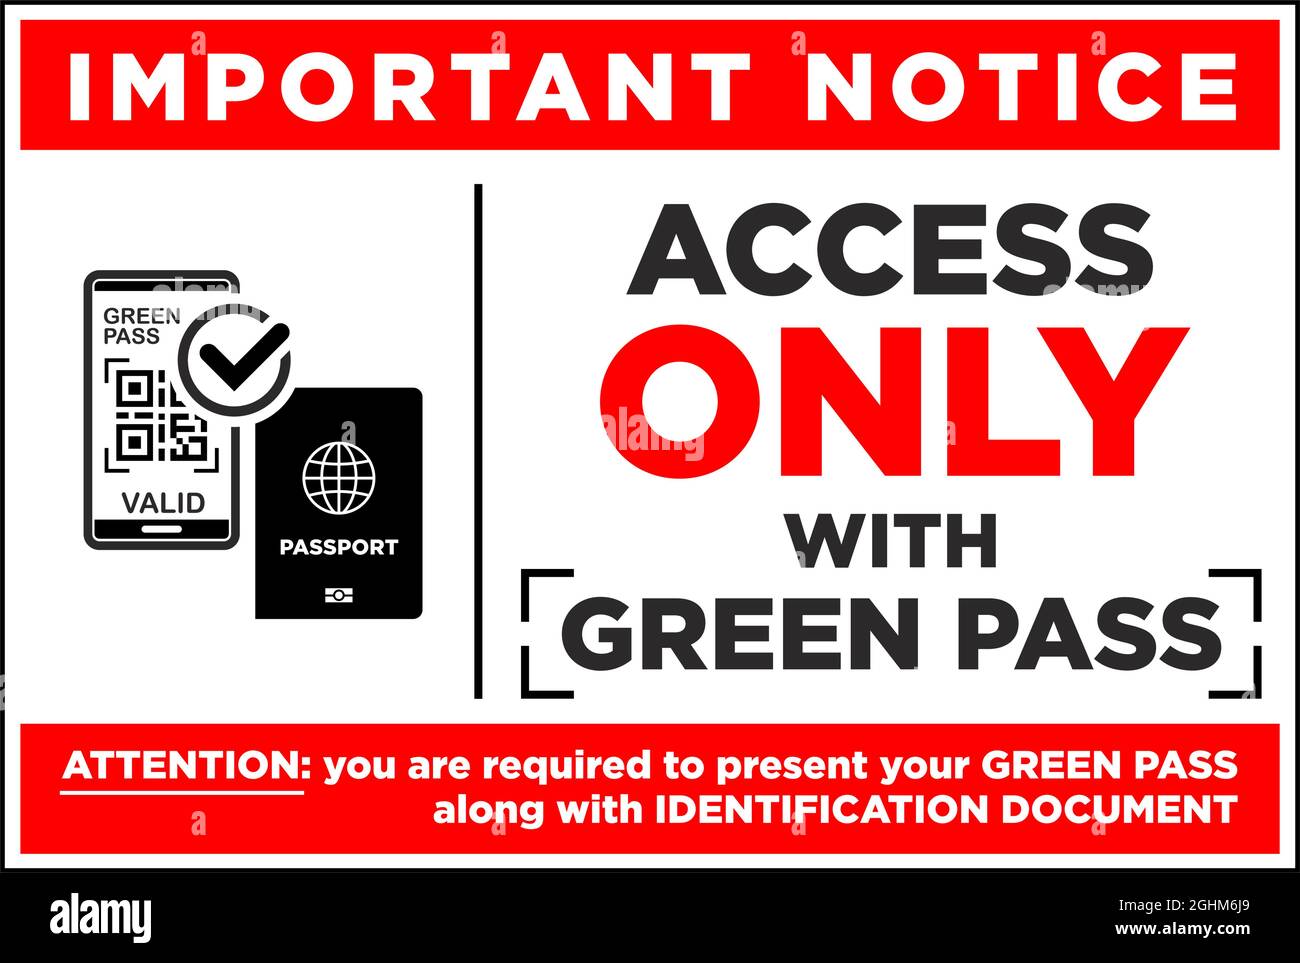 Important notice green pass required with id. Announcement before entering a public place during the coronavirus pandemic. Vector Stock Vector